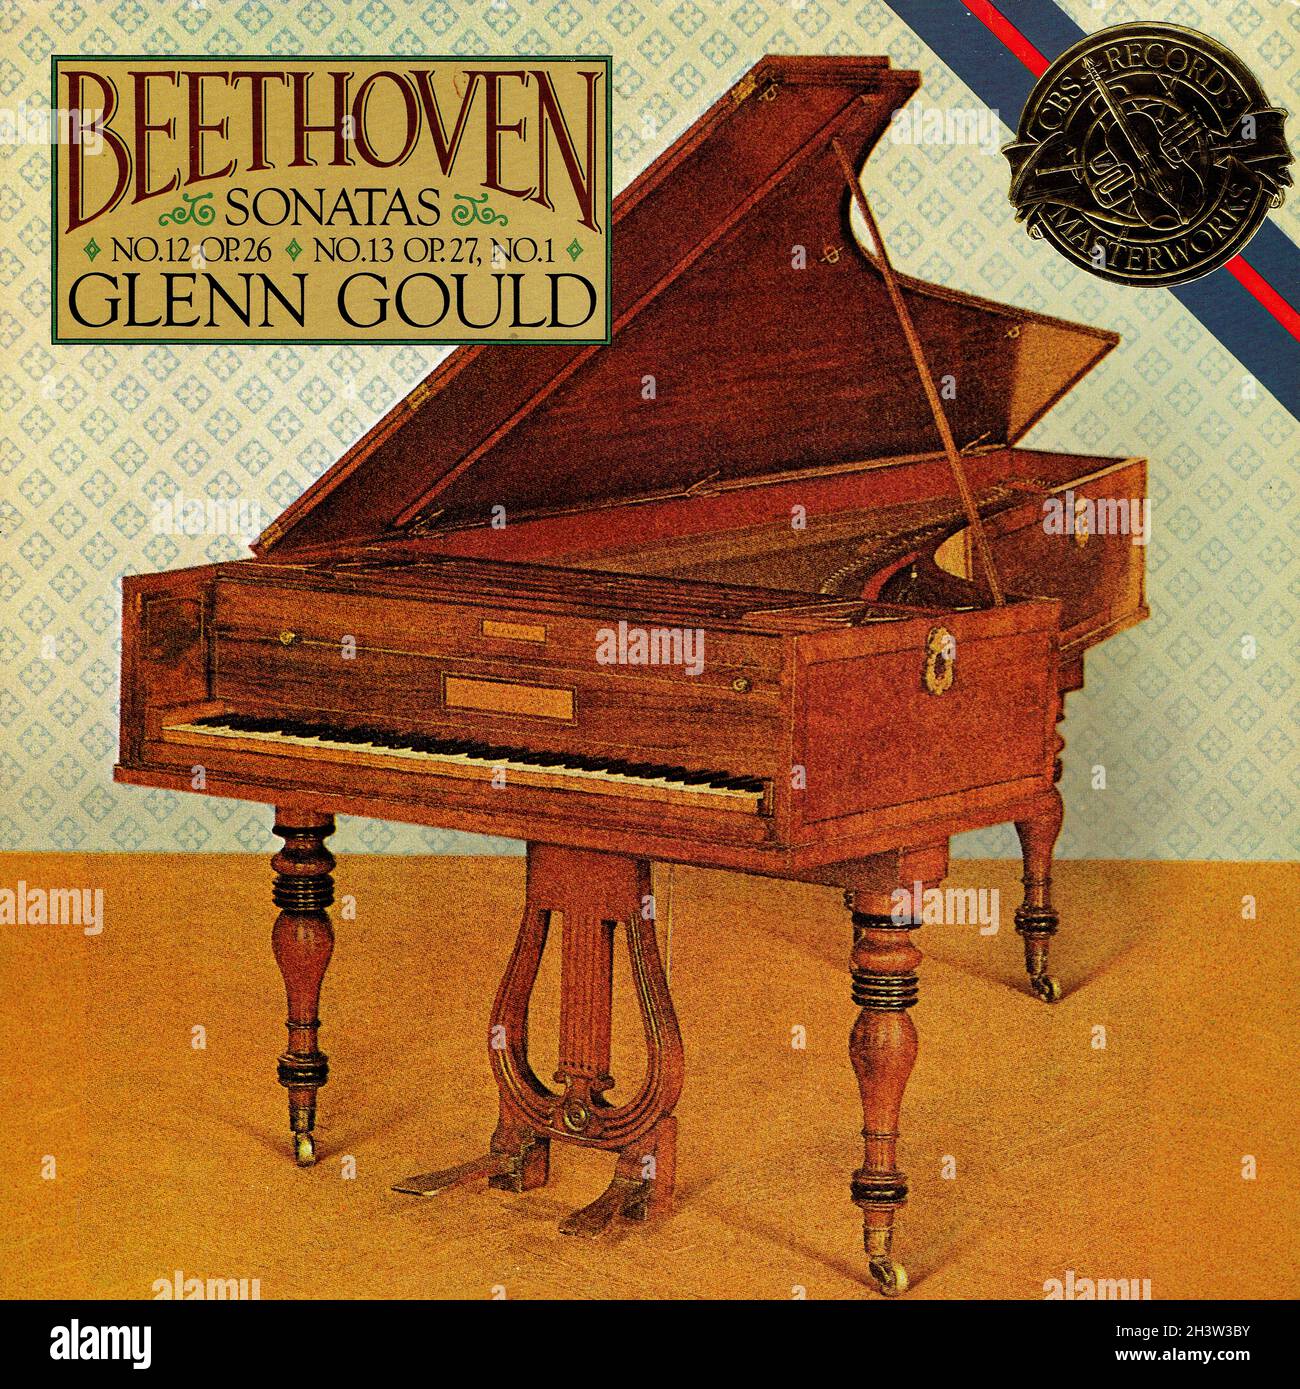 Beethoven Piano Sonata Op 26 â€¢ Op 27, No 1 - Gould CBS Masterworks 1 -  Classical Music Vintage Vinyl Record Stock Photo - Alamy